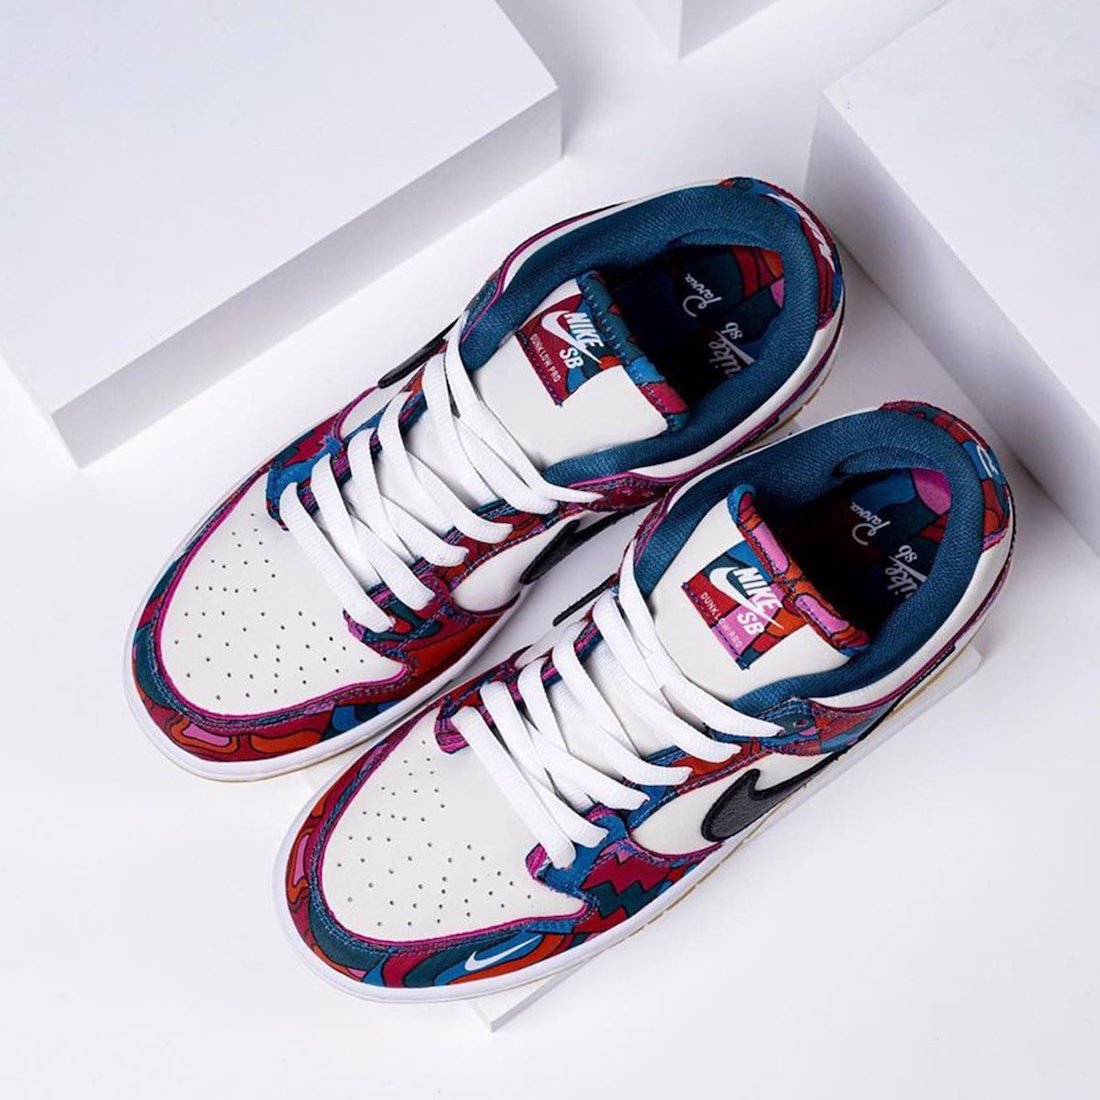 Parra Nike SB Dunk Low DH7695 600 Release Date 8